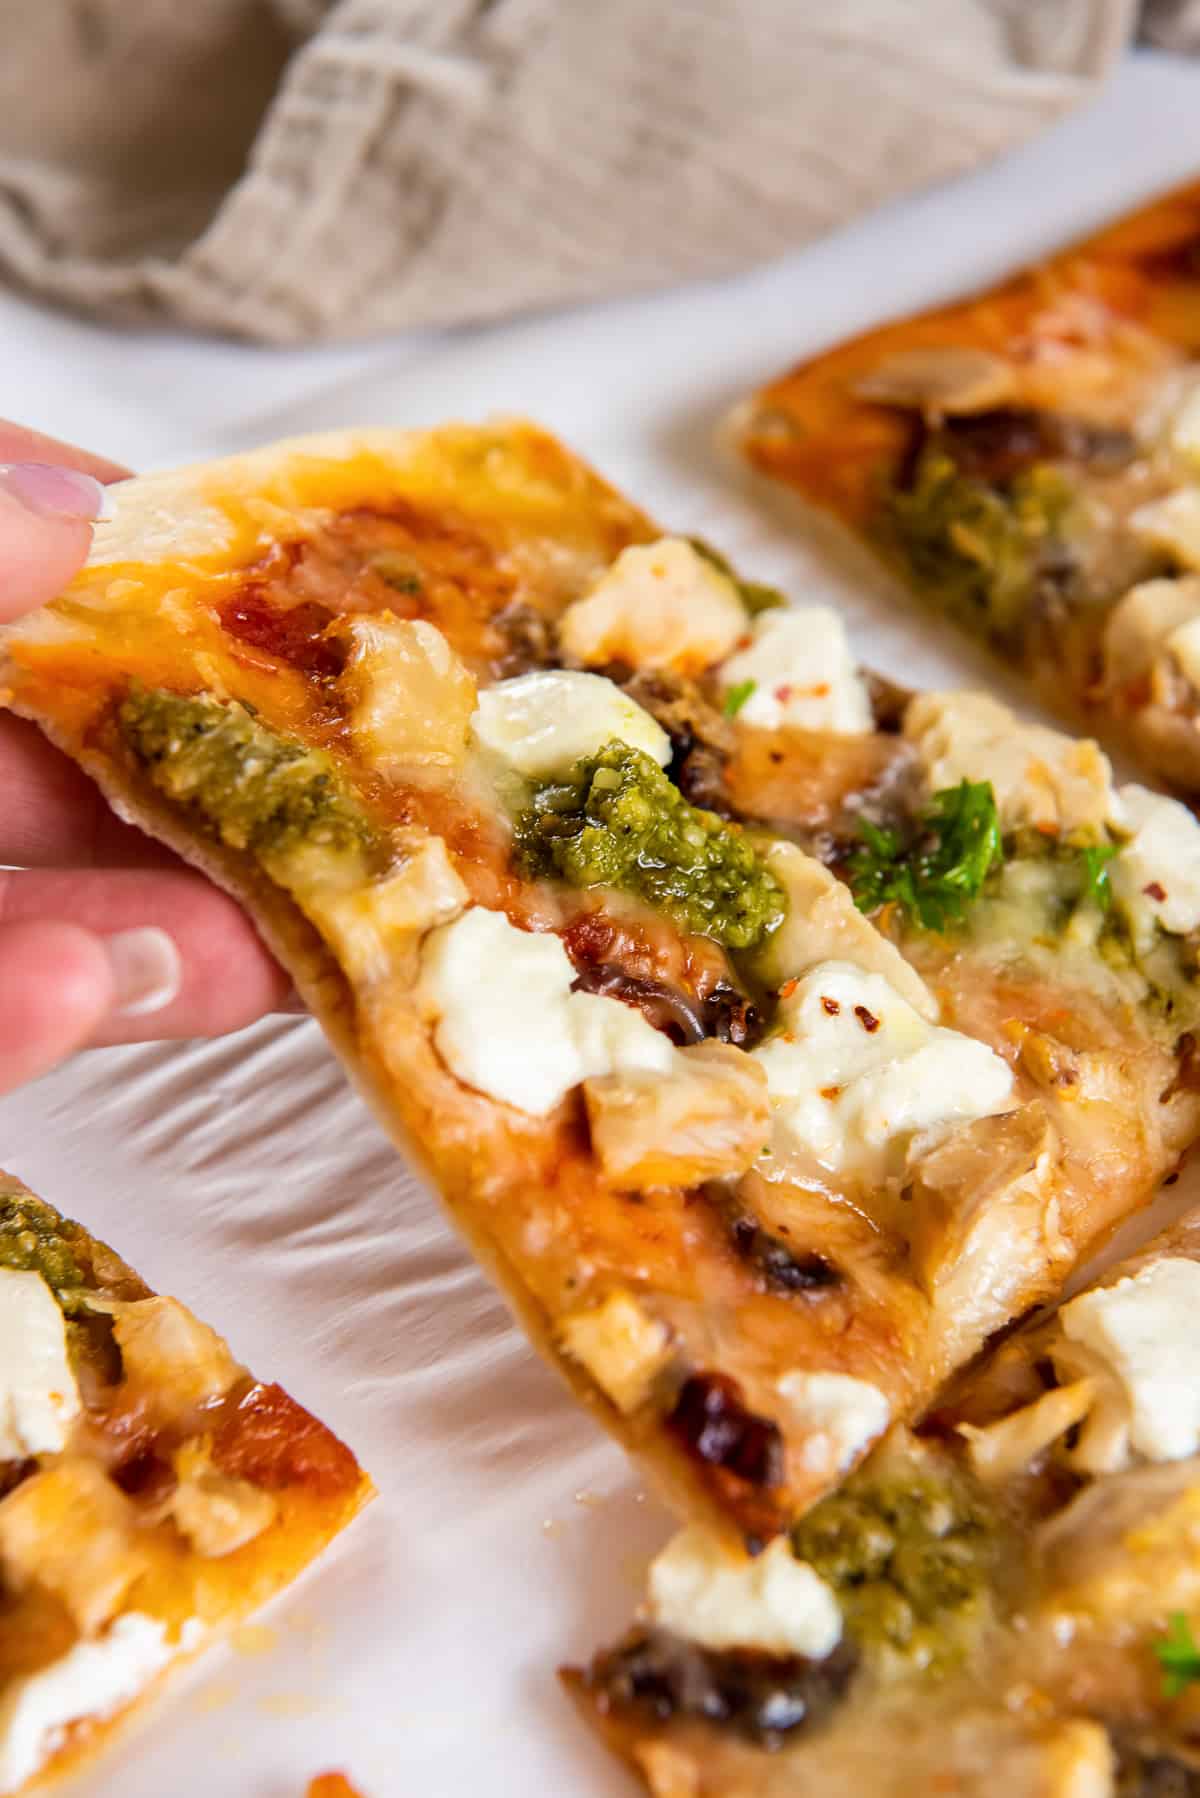 A hand lifting a slice of chicken pesto pizza.